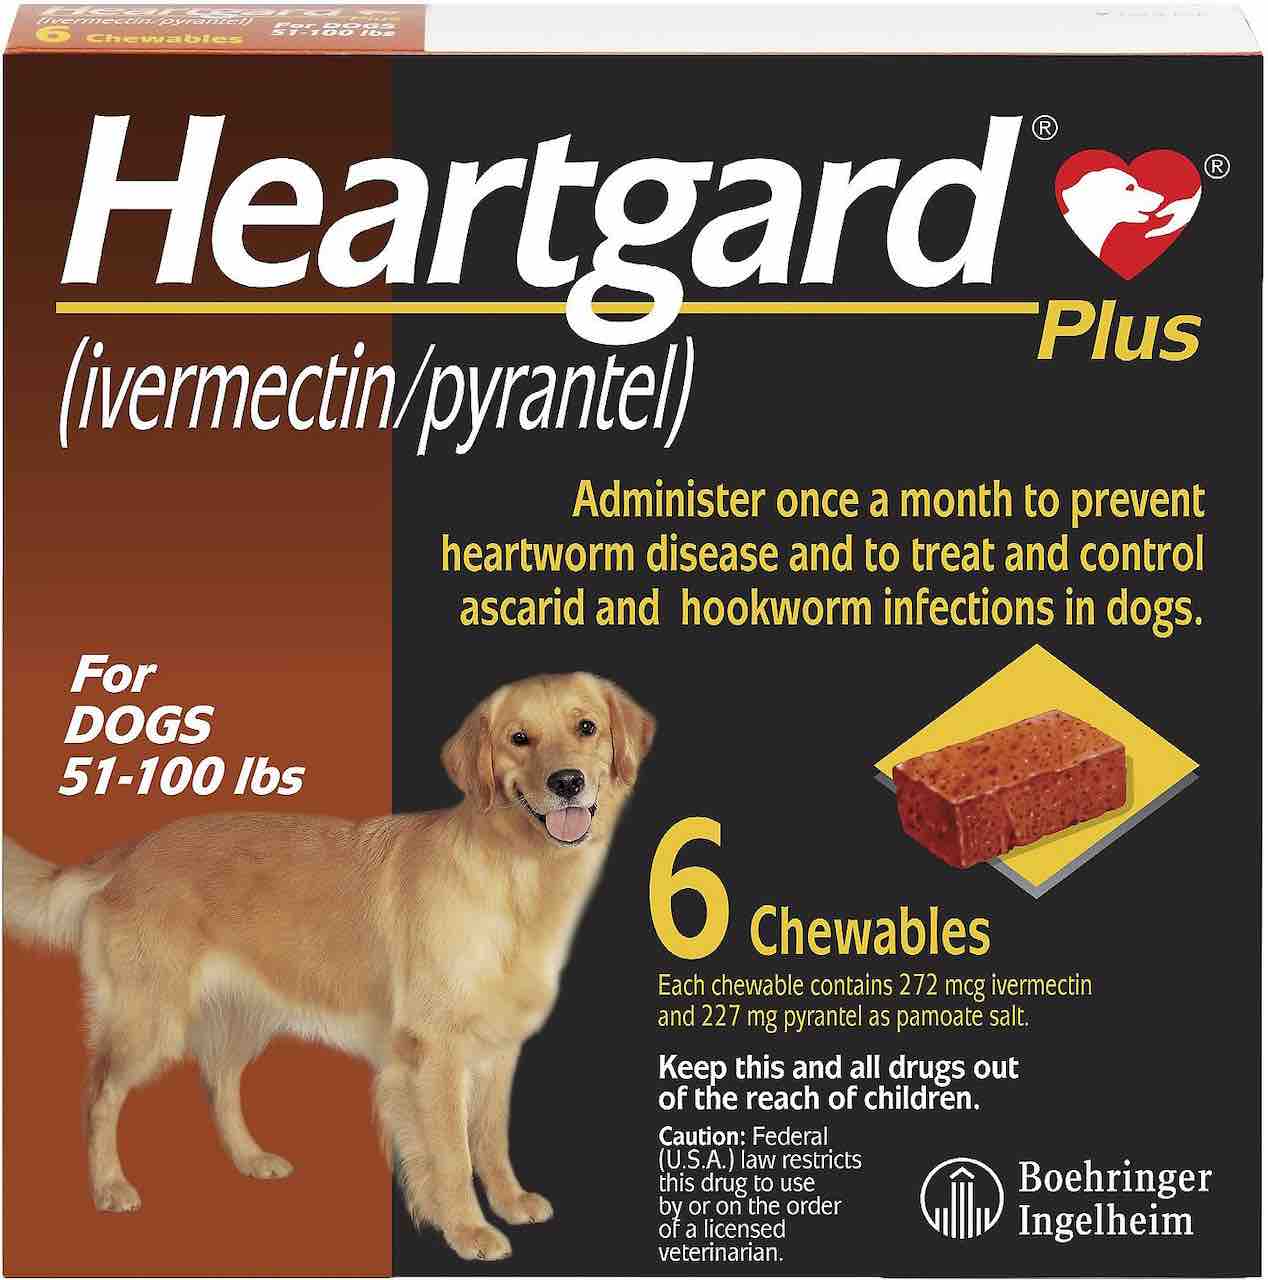 Heartgard Plus Chewables for dogs 51-100 lbs (Brown) 6 doses 1